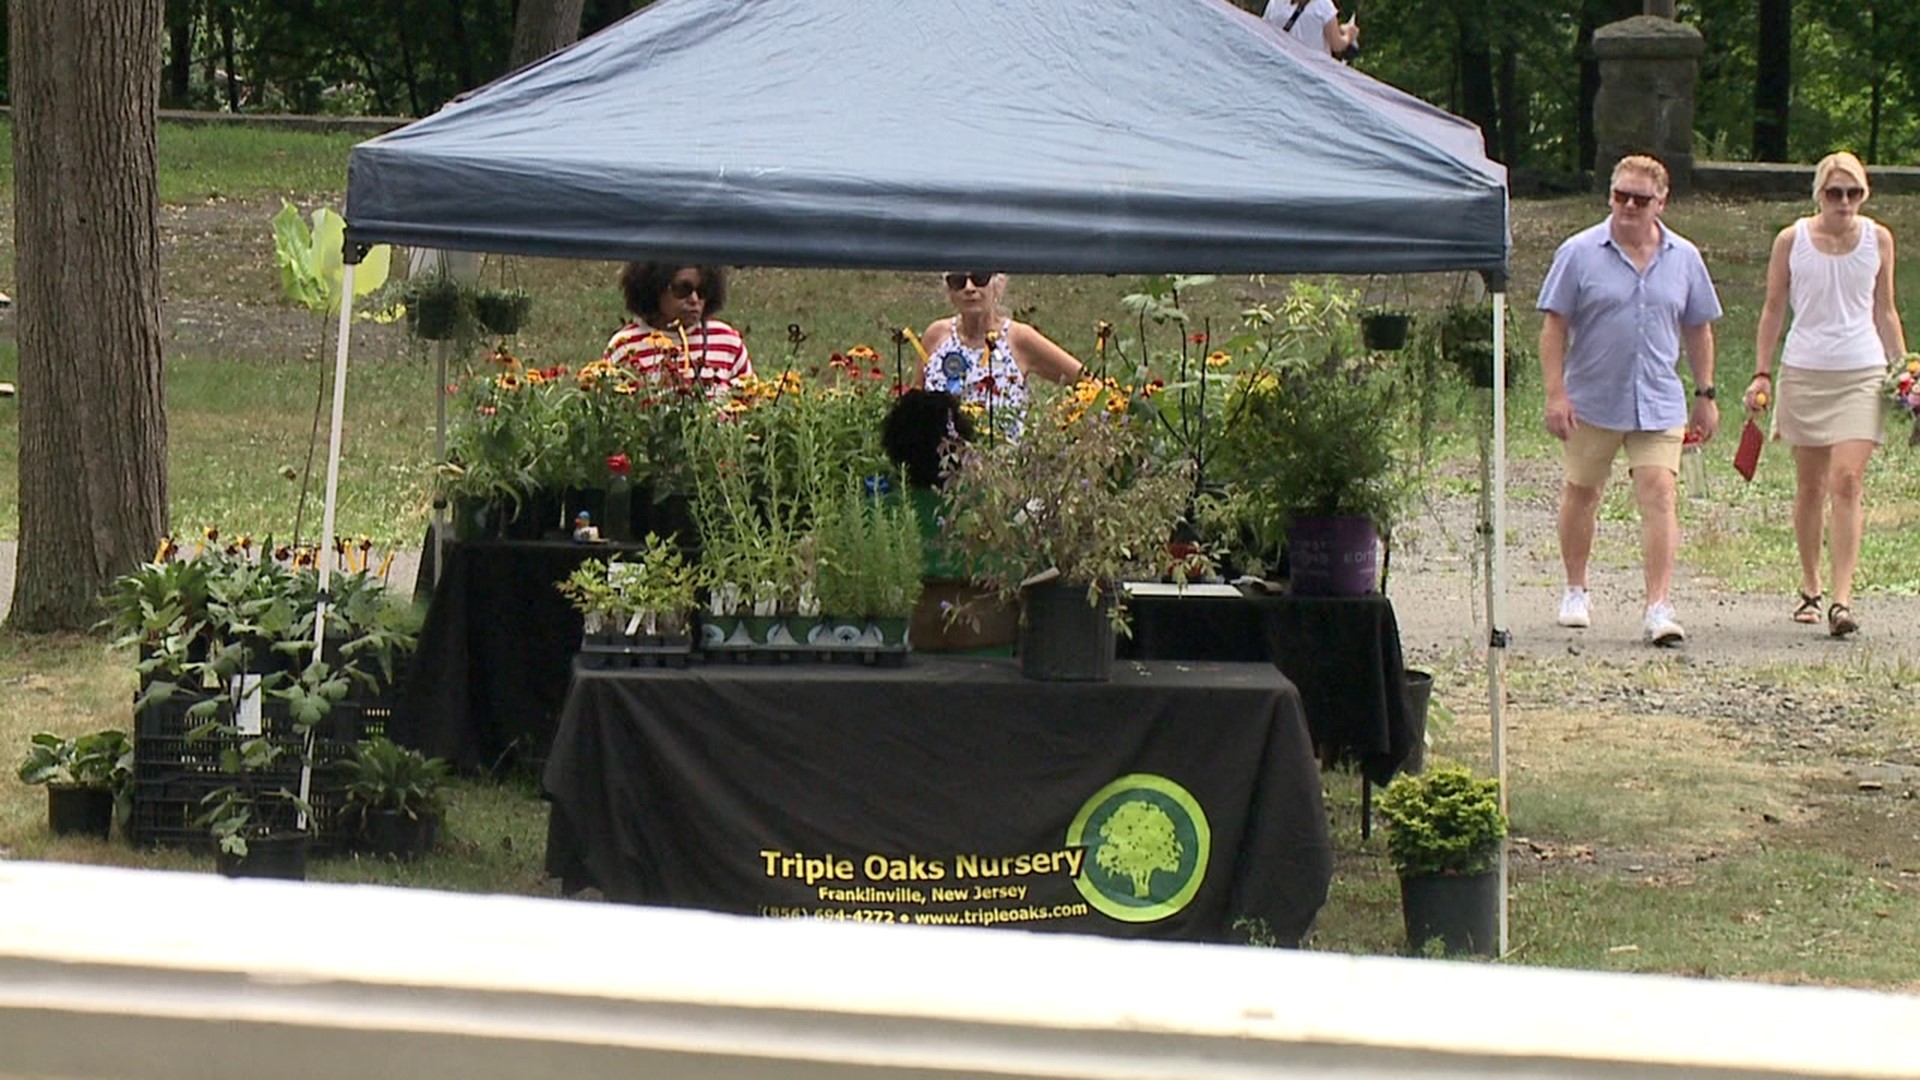 The inaugural flower show was held at Nay Aug Park Saturday afternoon.